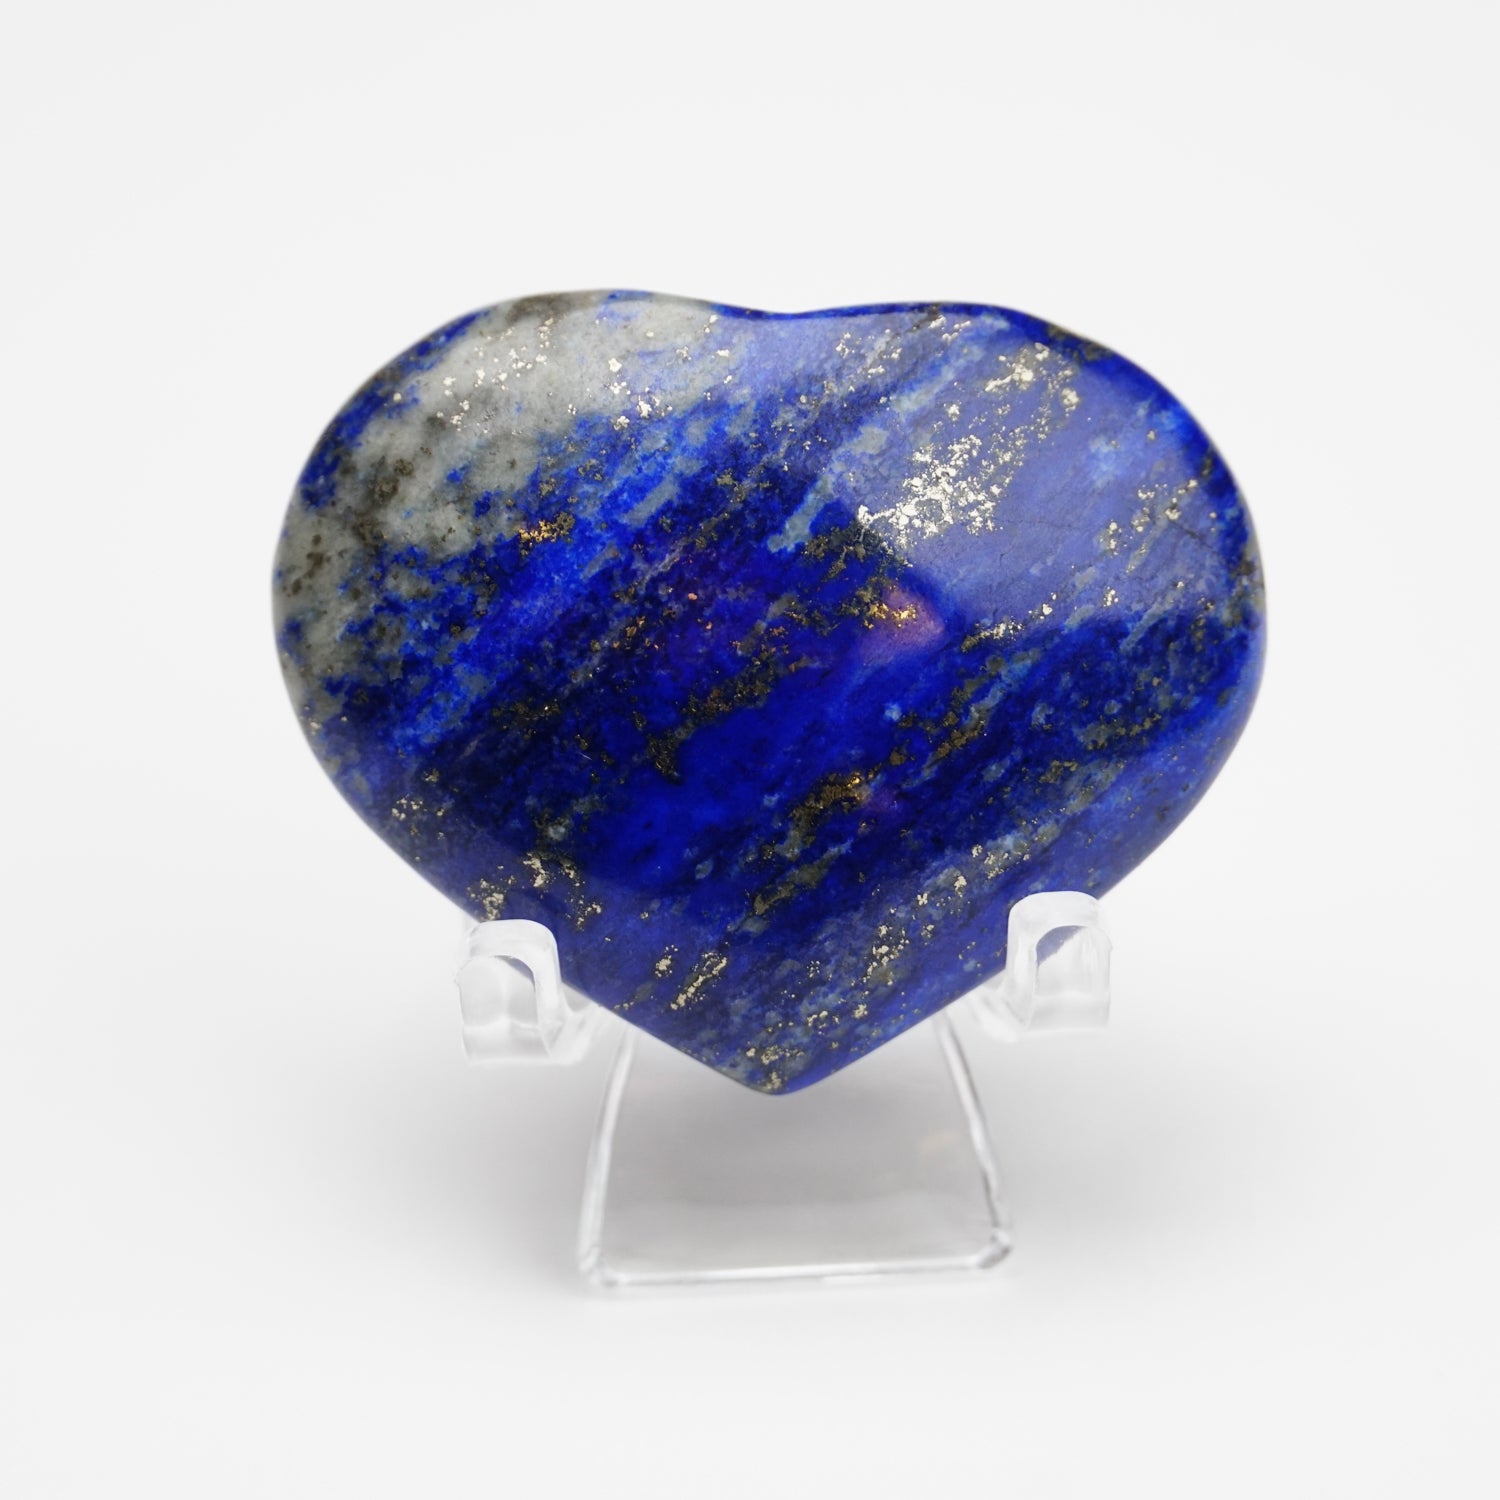 Polished Lapis Lazuli Heart from Afghanistan (38 grams)